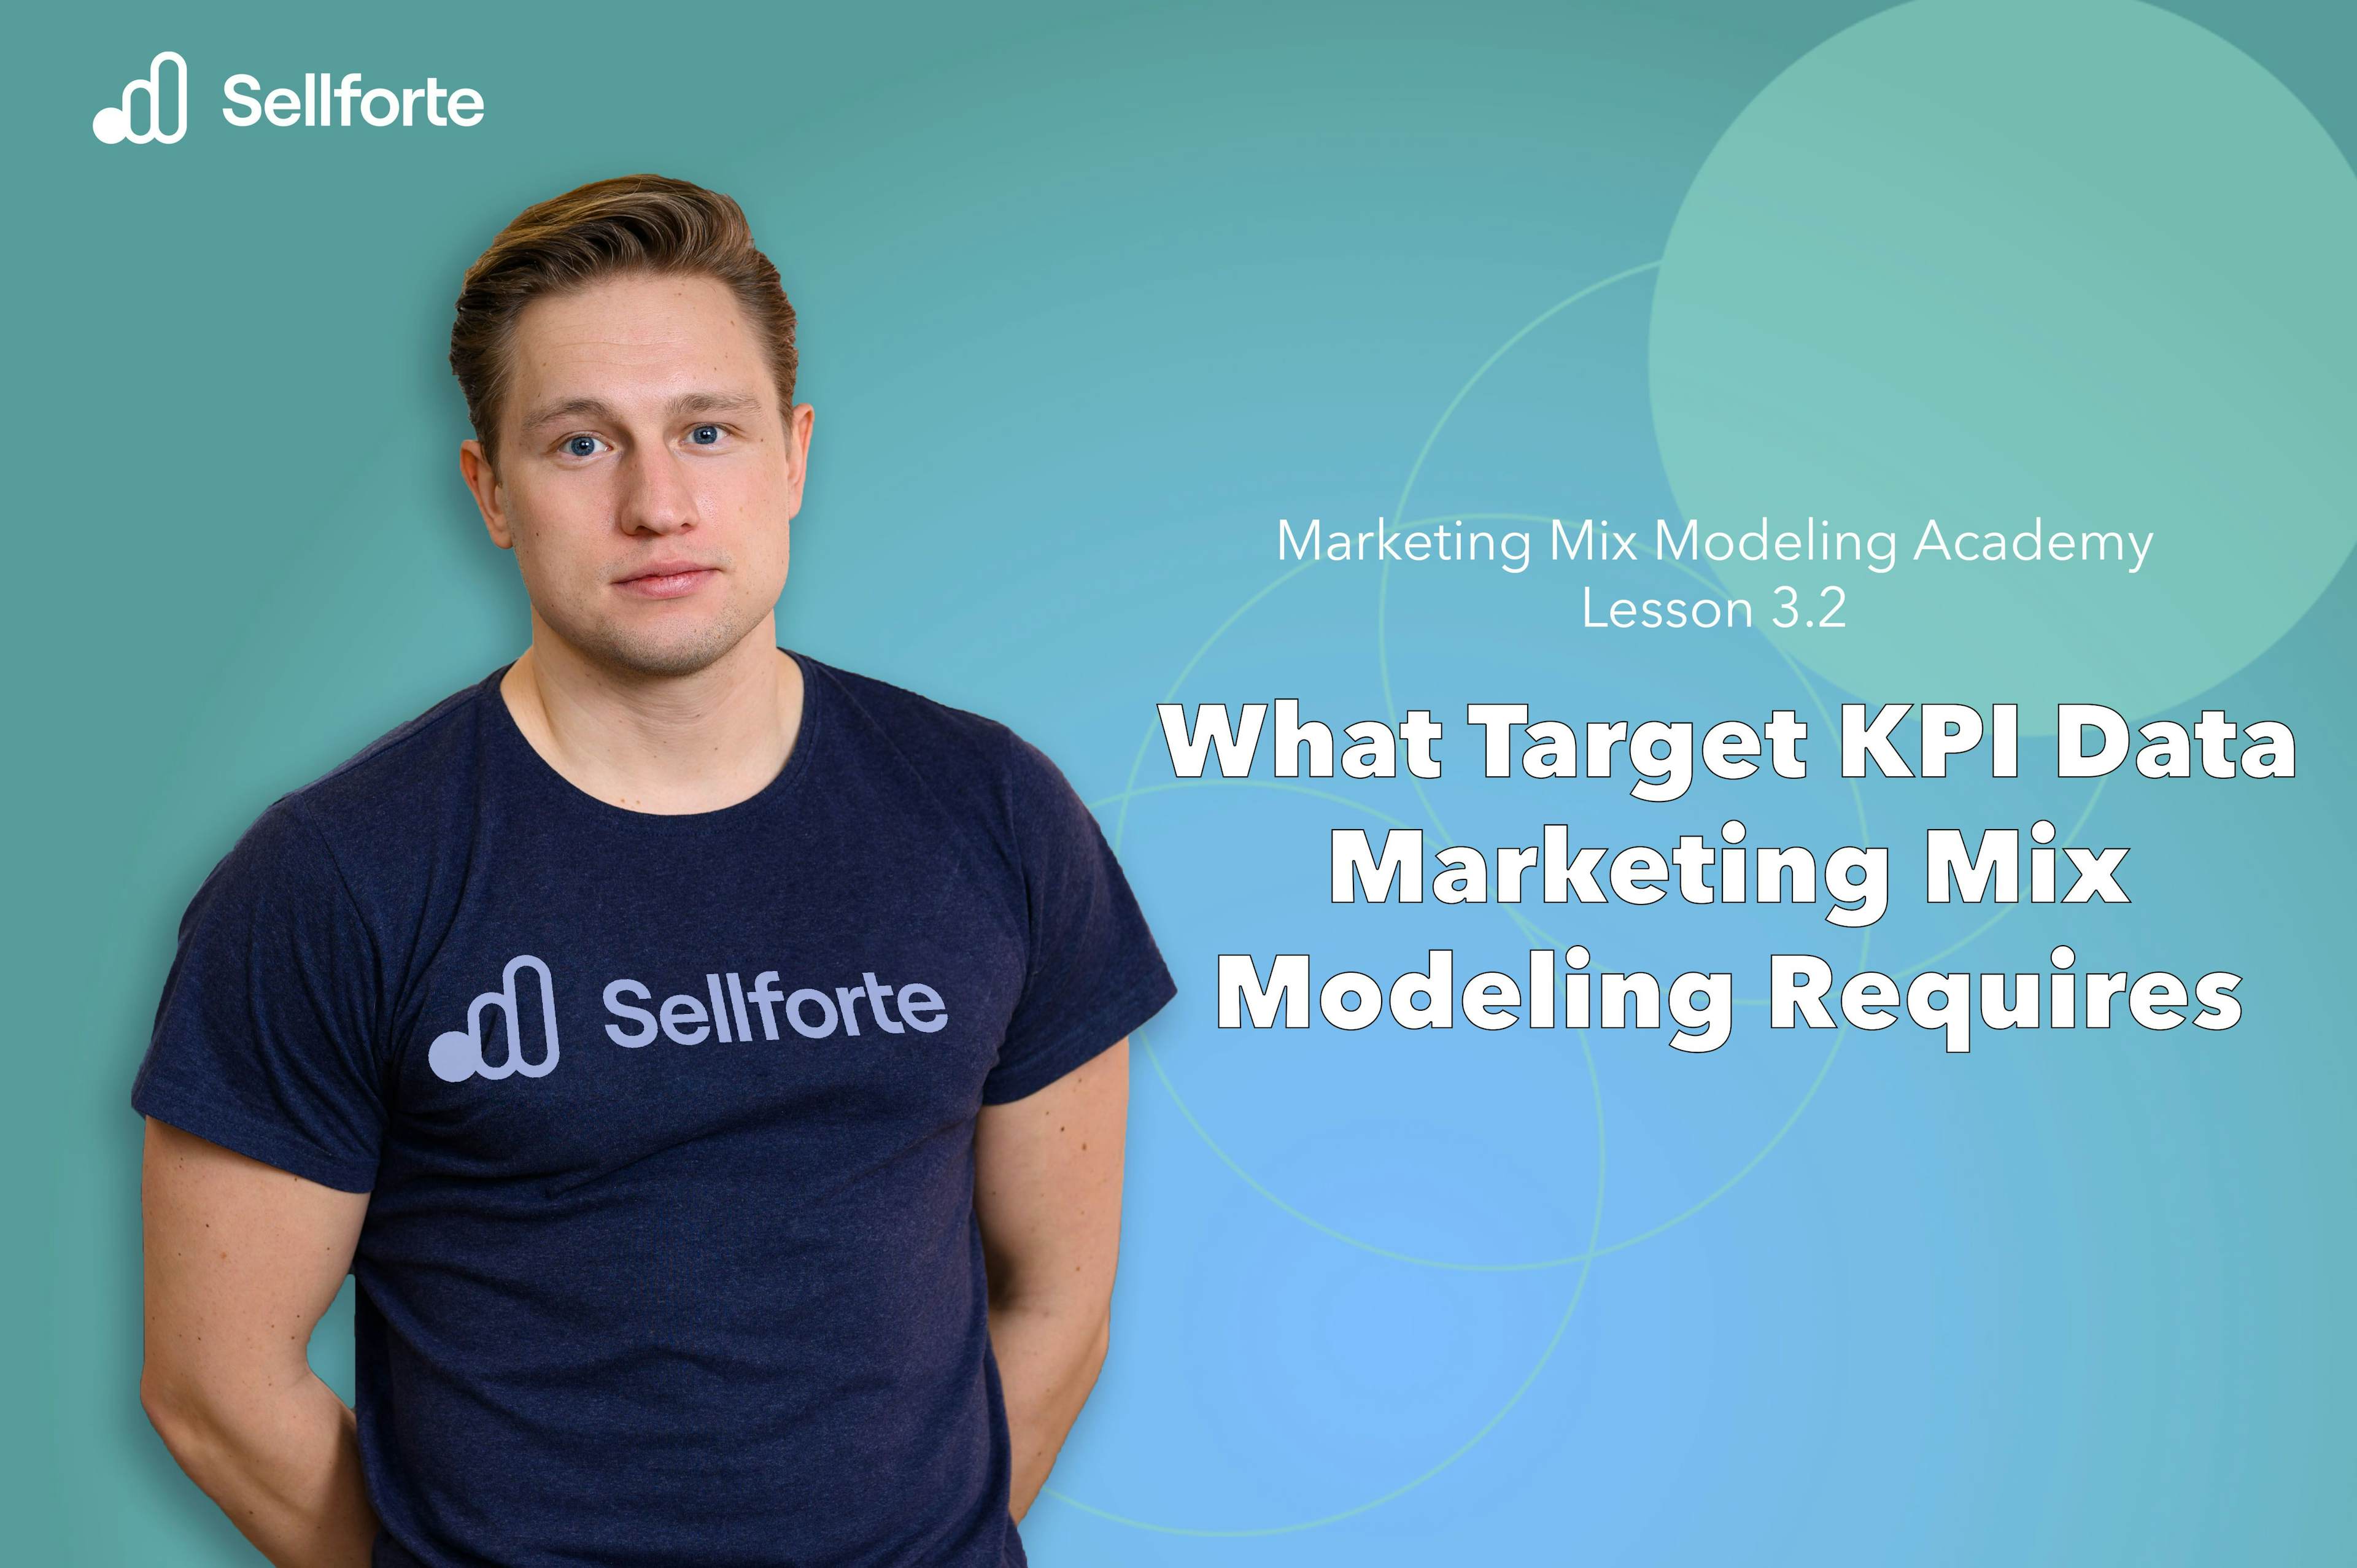 What target KPI data you need for marketing mix modeling